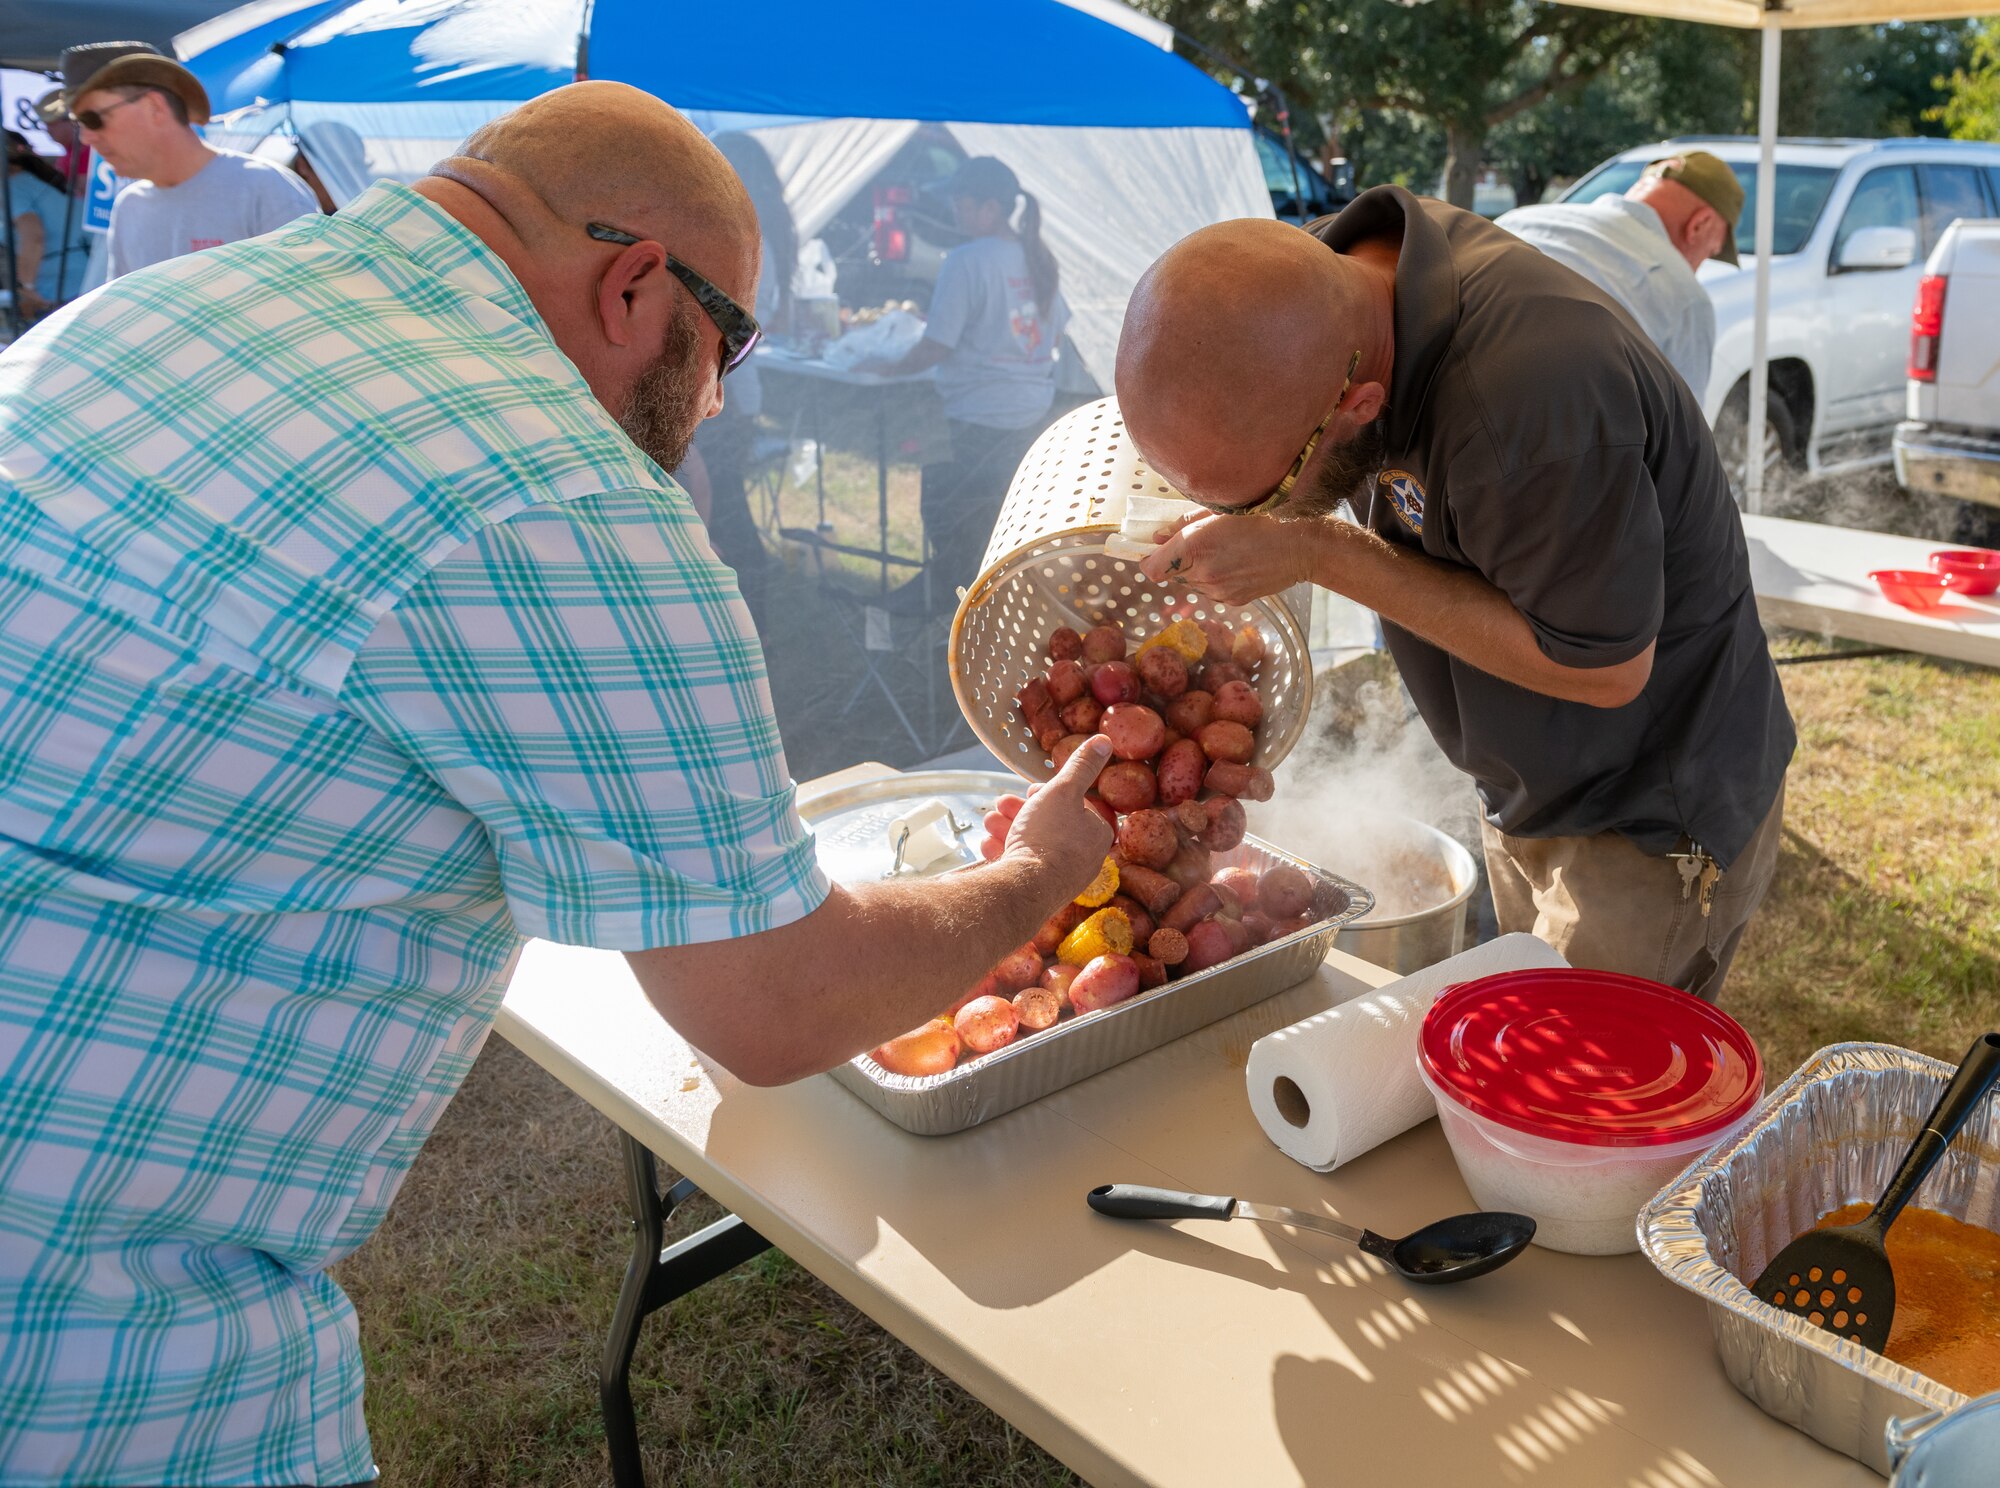 Members of the "Last Minute" team prepare the 'fixins' during the Tails 'N Ales Annual Shrimp Cook-off outside the Bay Breeze Event Center at Keesler Air Force Base, Mississippi, Oct. 14, 2022. The 81st Force Support Squadron hosted event offered a variety of craft beers for tasting and many teams fighting for the ultimate best shrimp recipe. (U.S. Air Force photo by Andre' Askew)